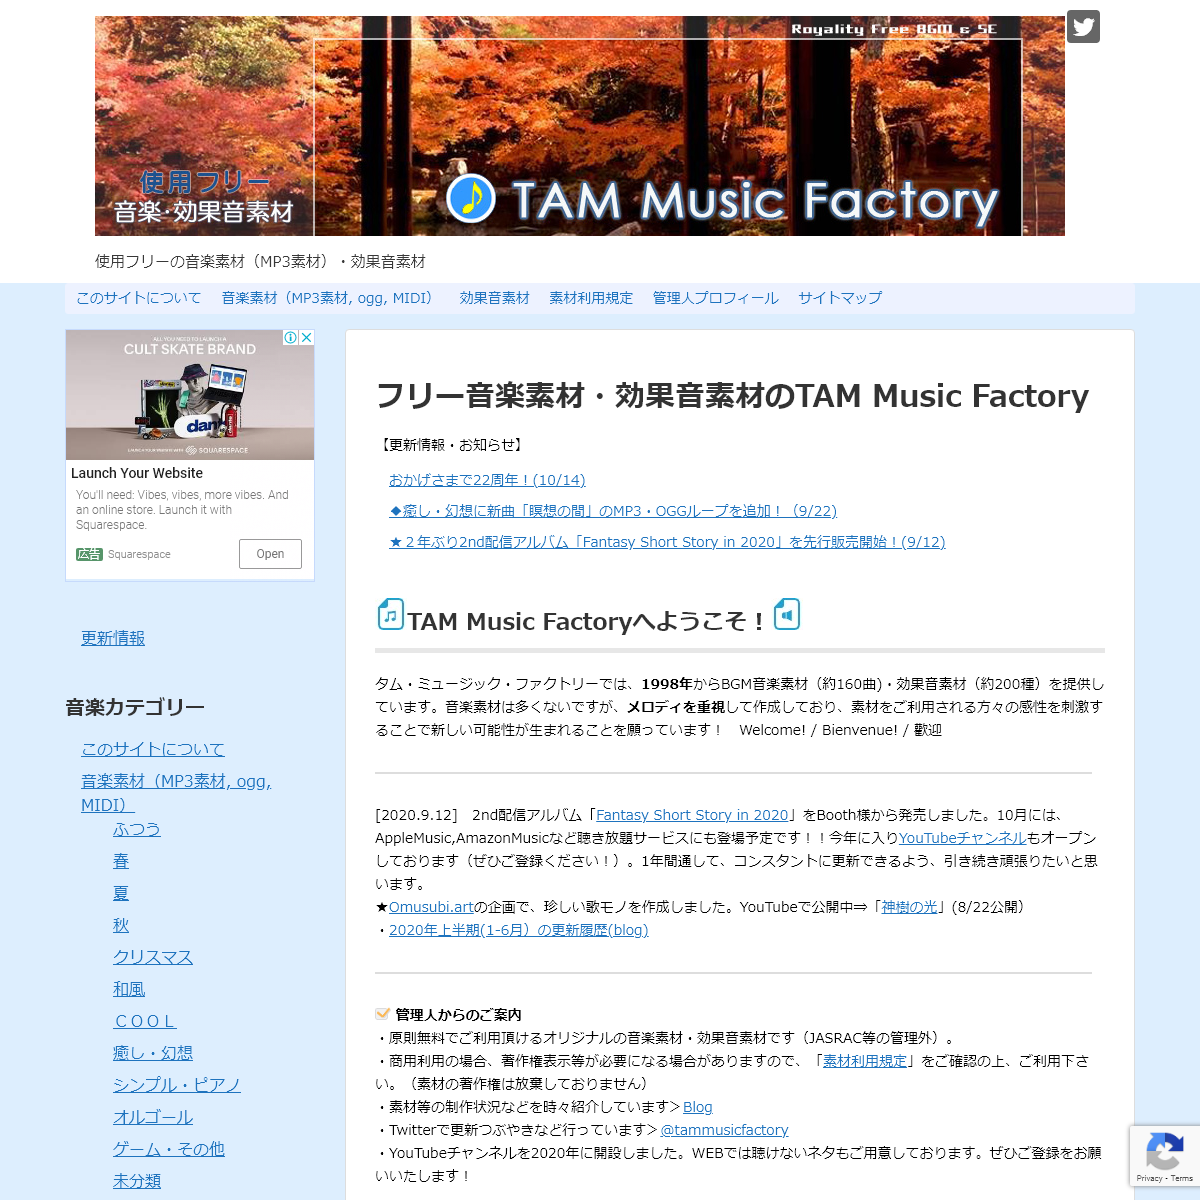 A complete backup of tam-music.com